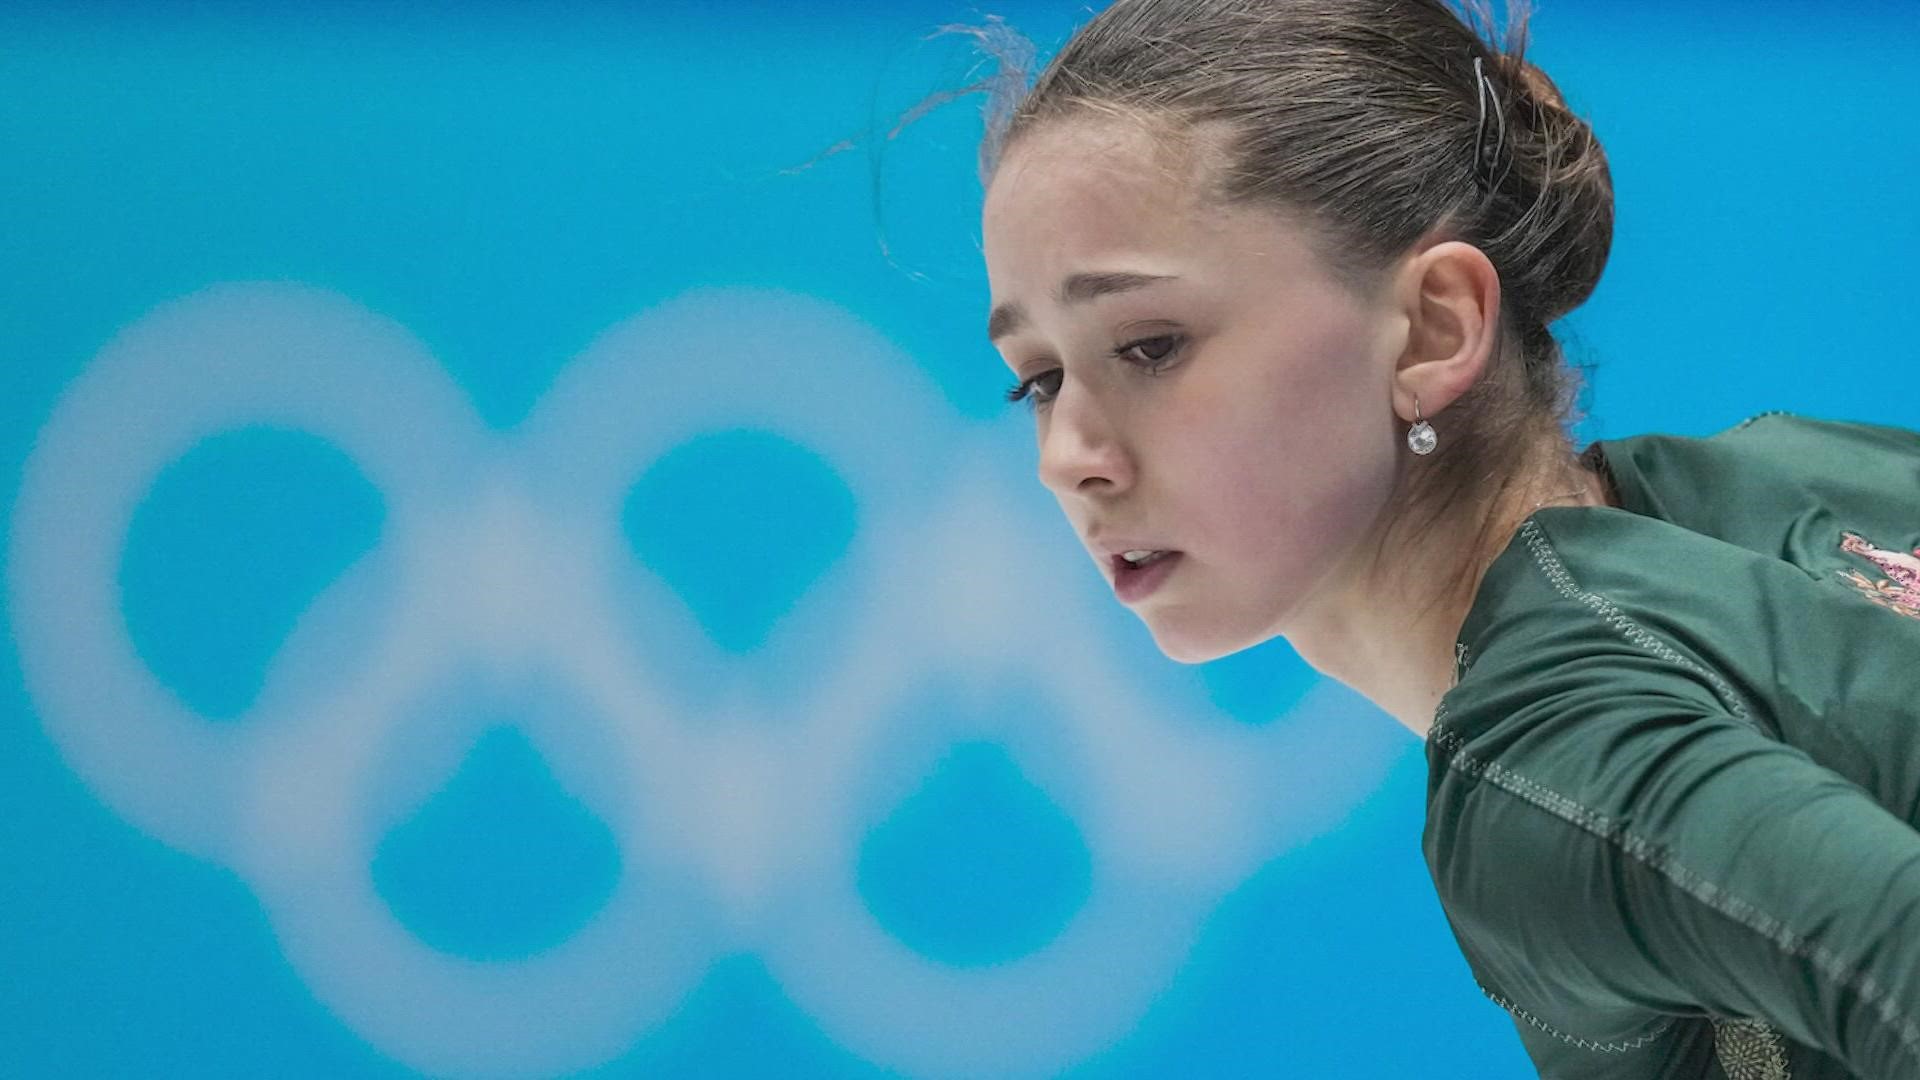 "You know it's just disappointing. It's the whole concept of win at all costs," said figure skating coach Sheila Thelen.